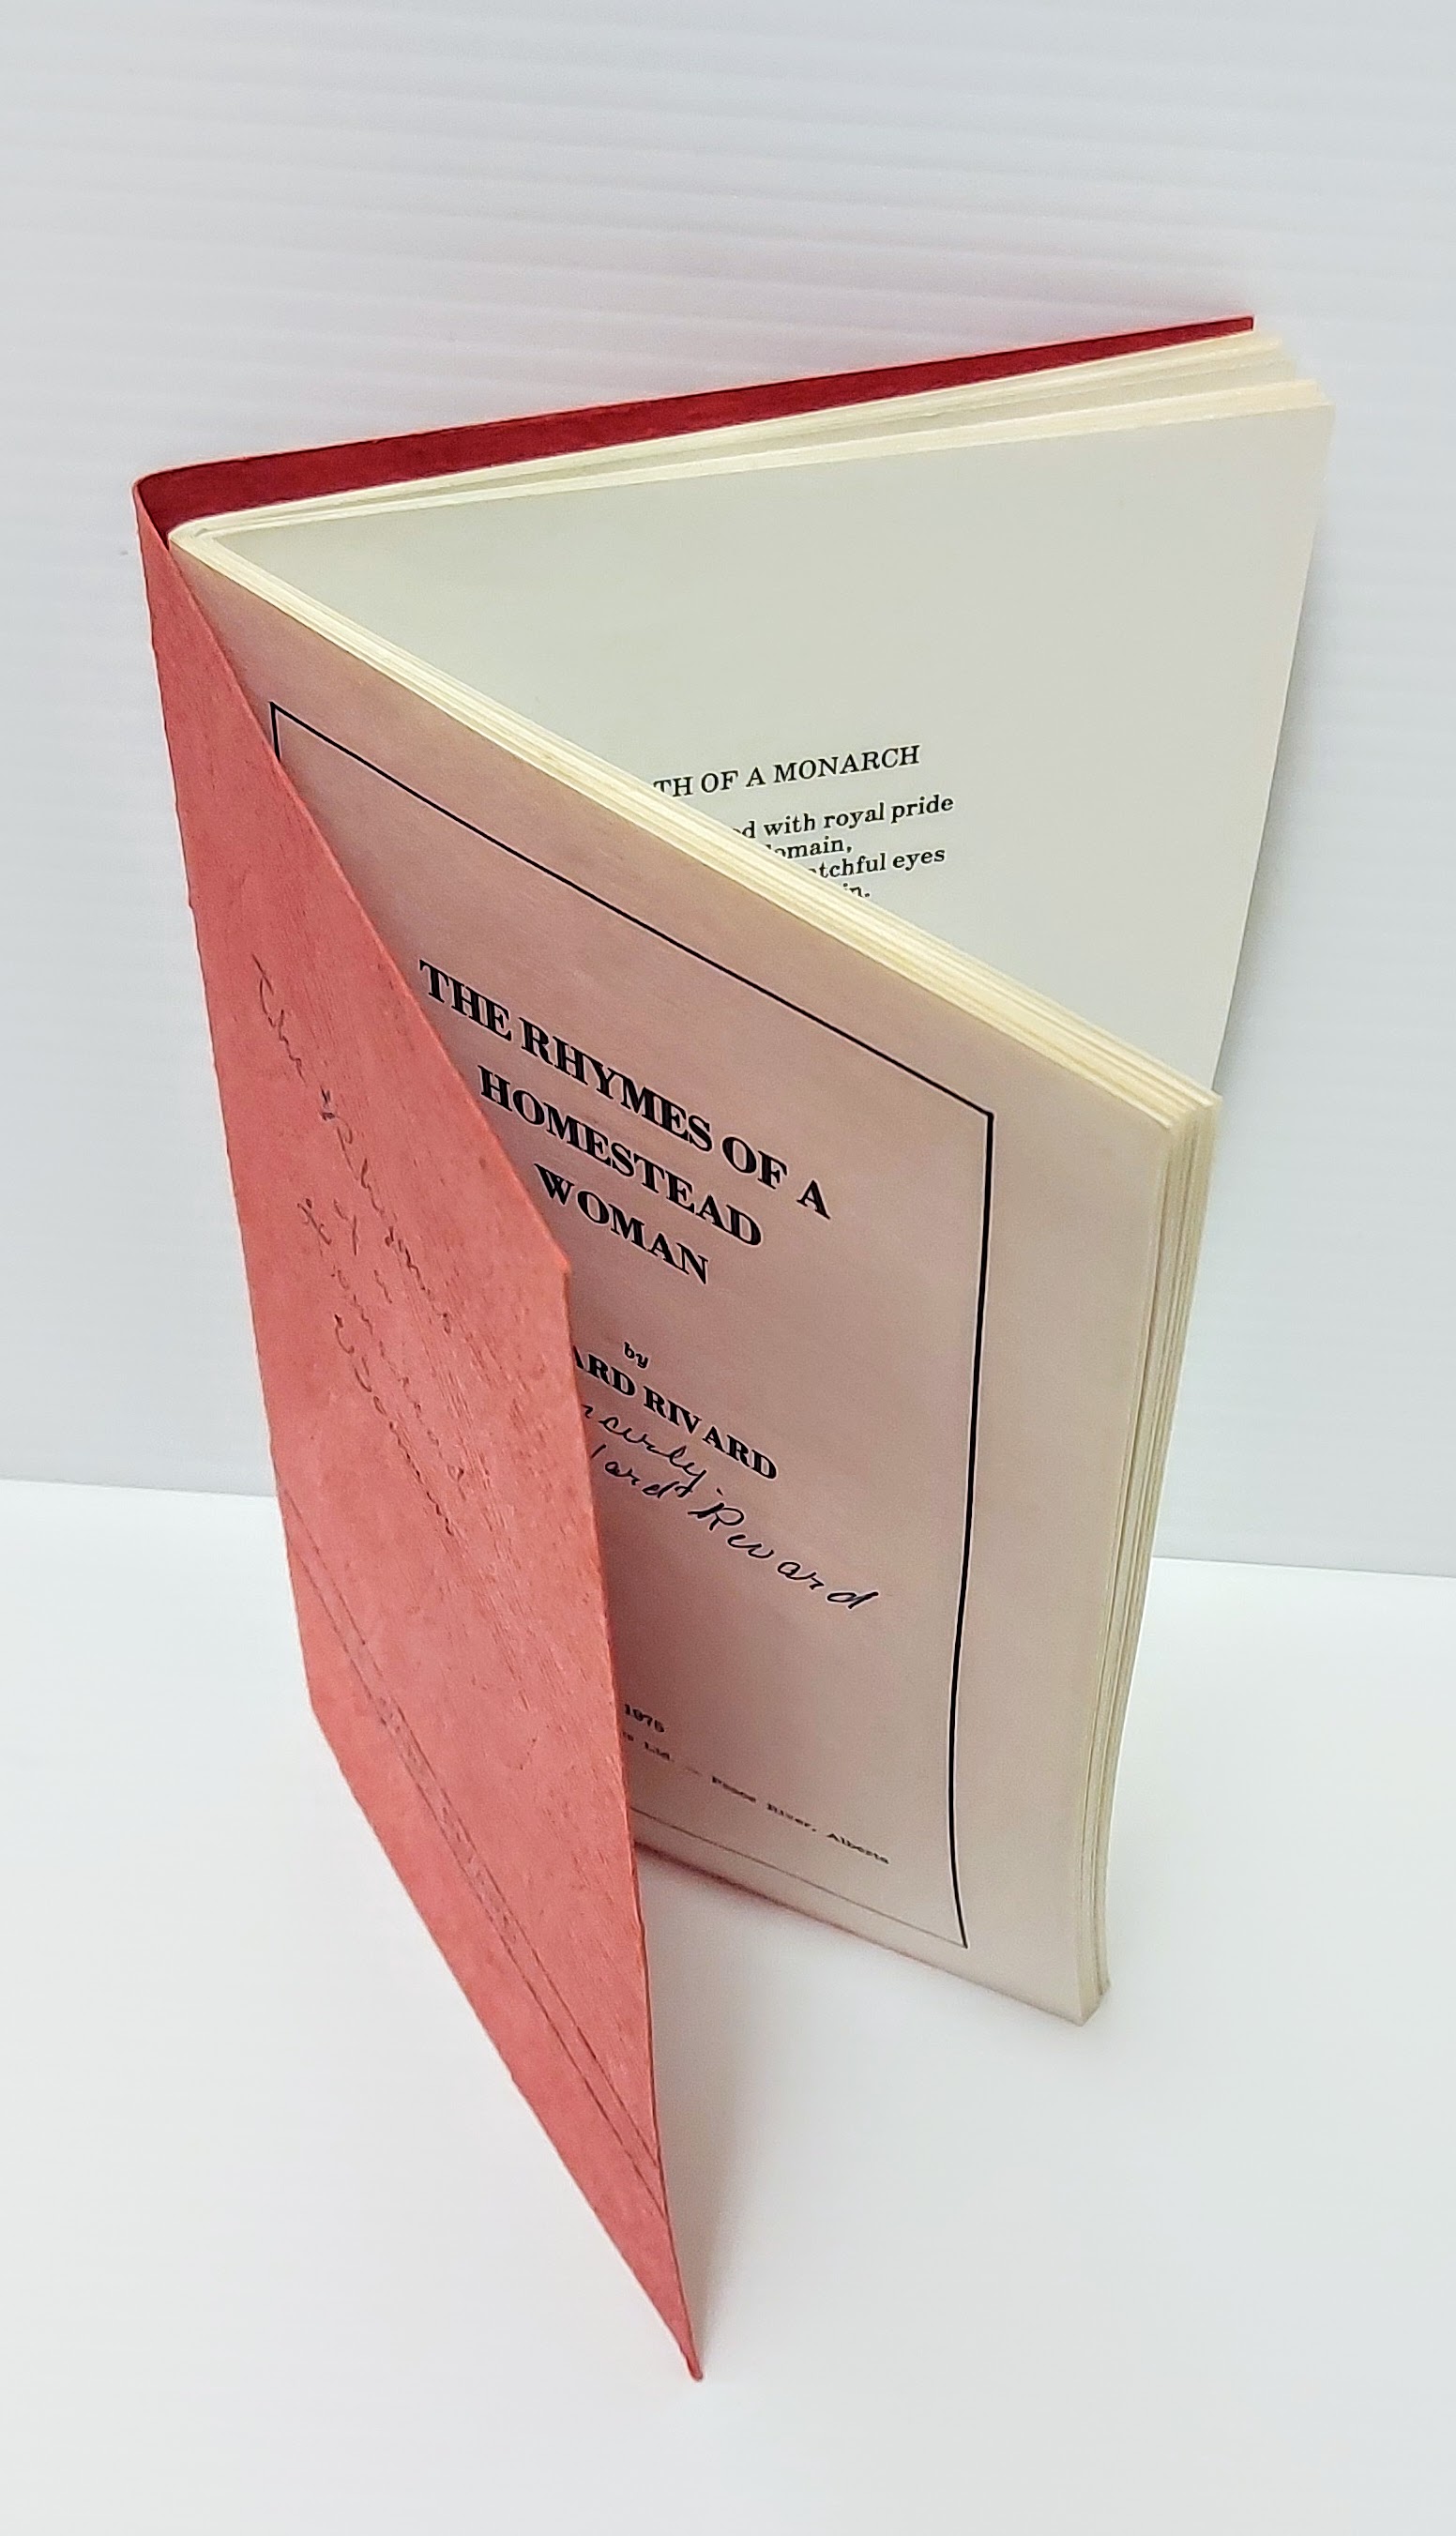 Tomorrow (March 21) is UNESCO World poetry day. As such we have selected Elizabeth Ward-Rivard's self published book "Rhymes of a Homestead Woman" as our artifact of the week! The book contains an impressive 38 poems in 48 pages which tell of the beauty, heartache, and characters of the area that she loved and called home. Elizabeth moved to the area with her husband George and 4 children in 1919. The book was reprinted several times - this edition coming from 1975 and is signed by the author.
990.1.130.2 / Newman, Jack + Pearl